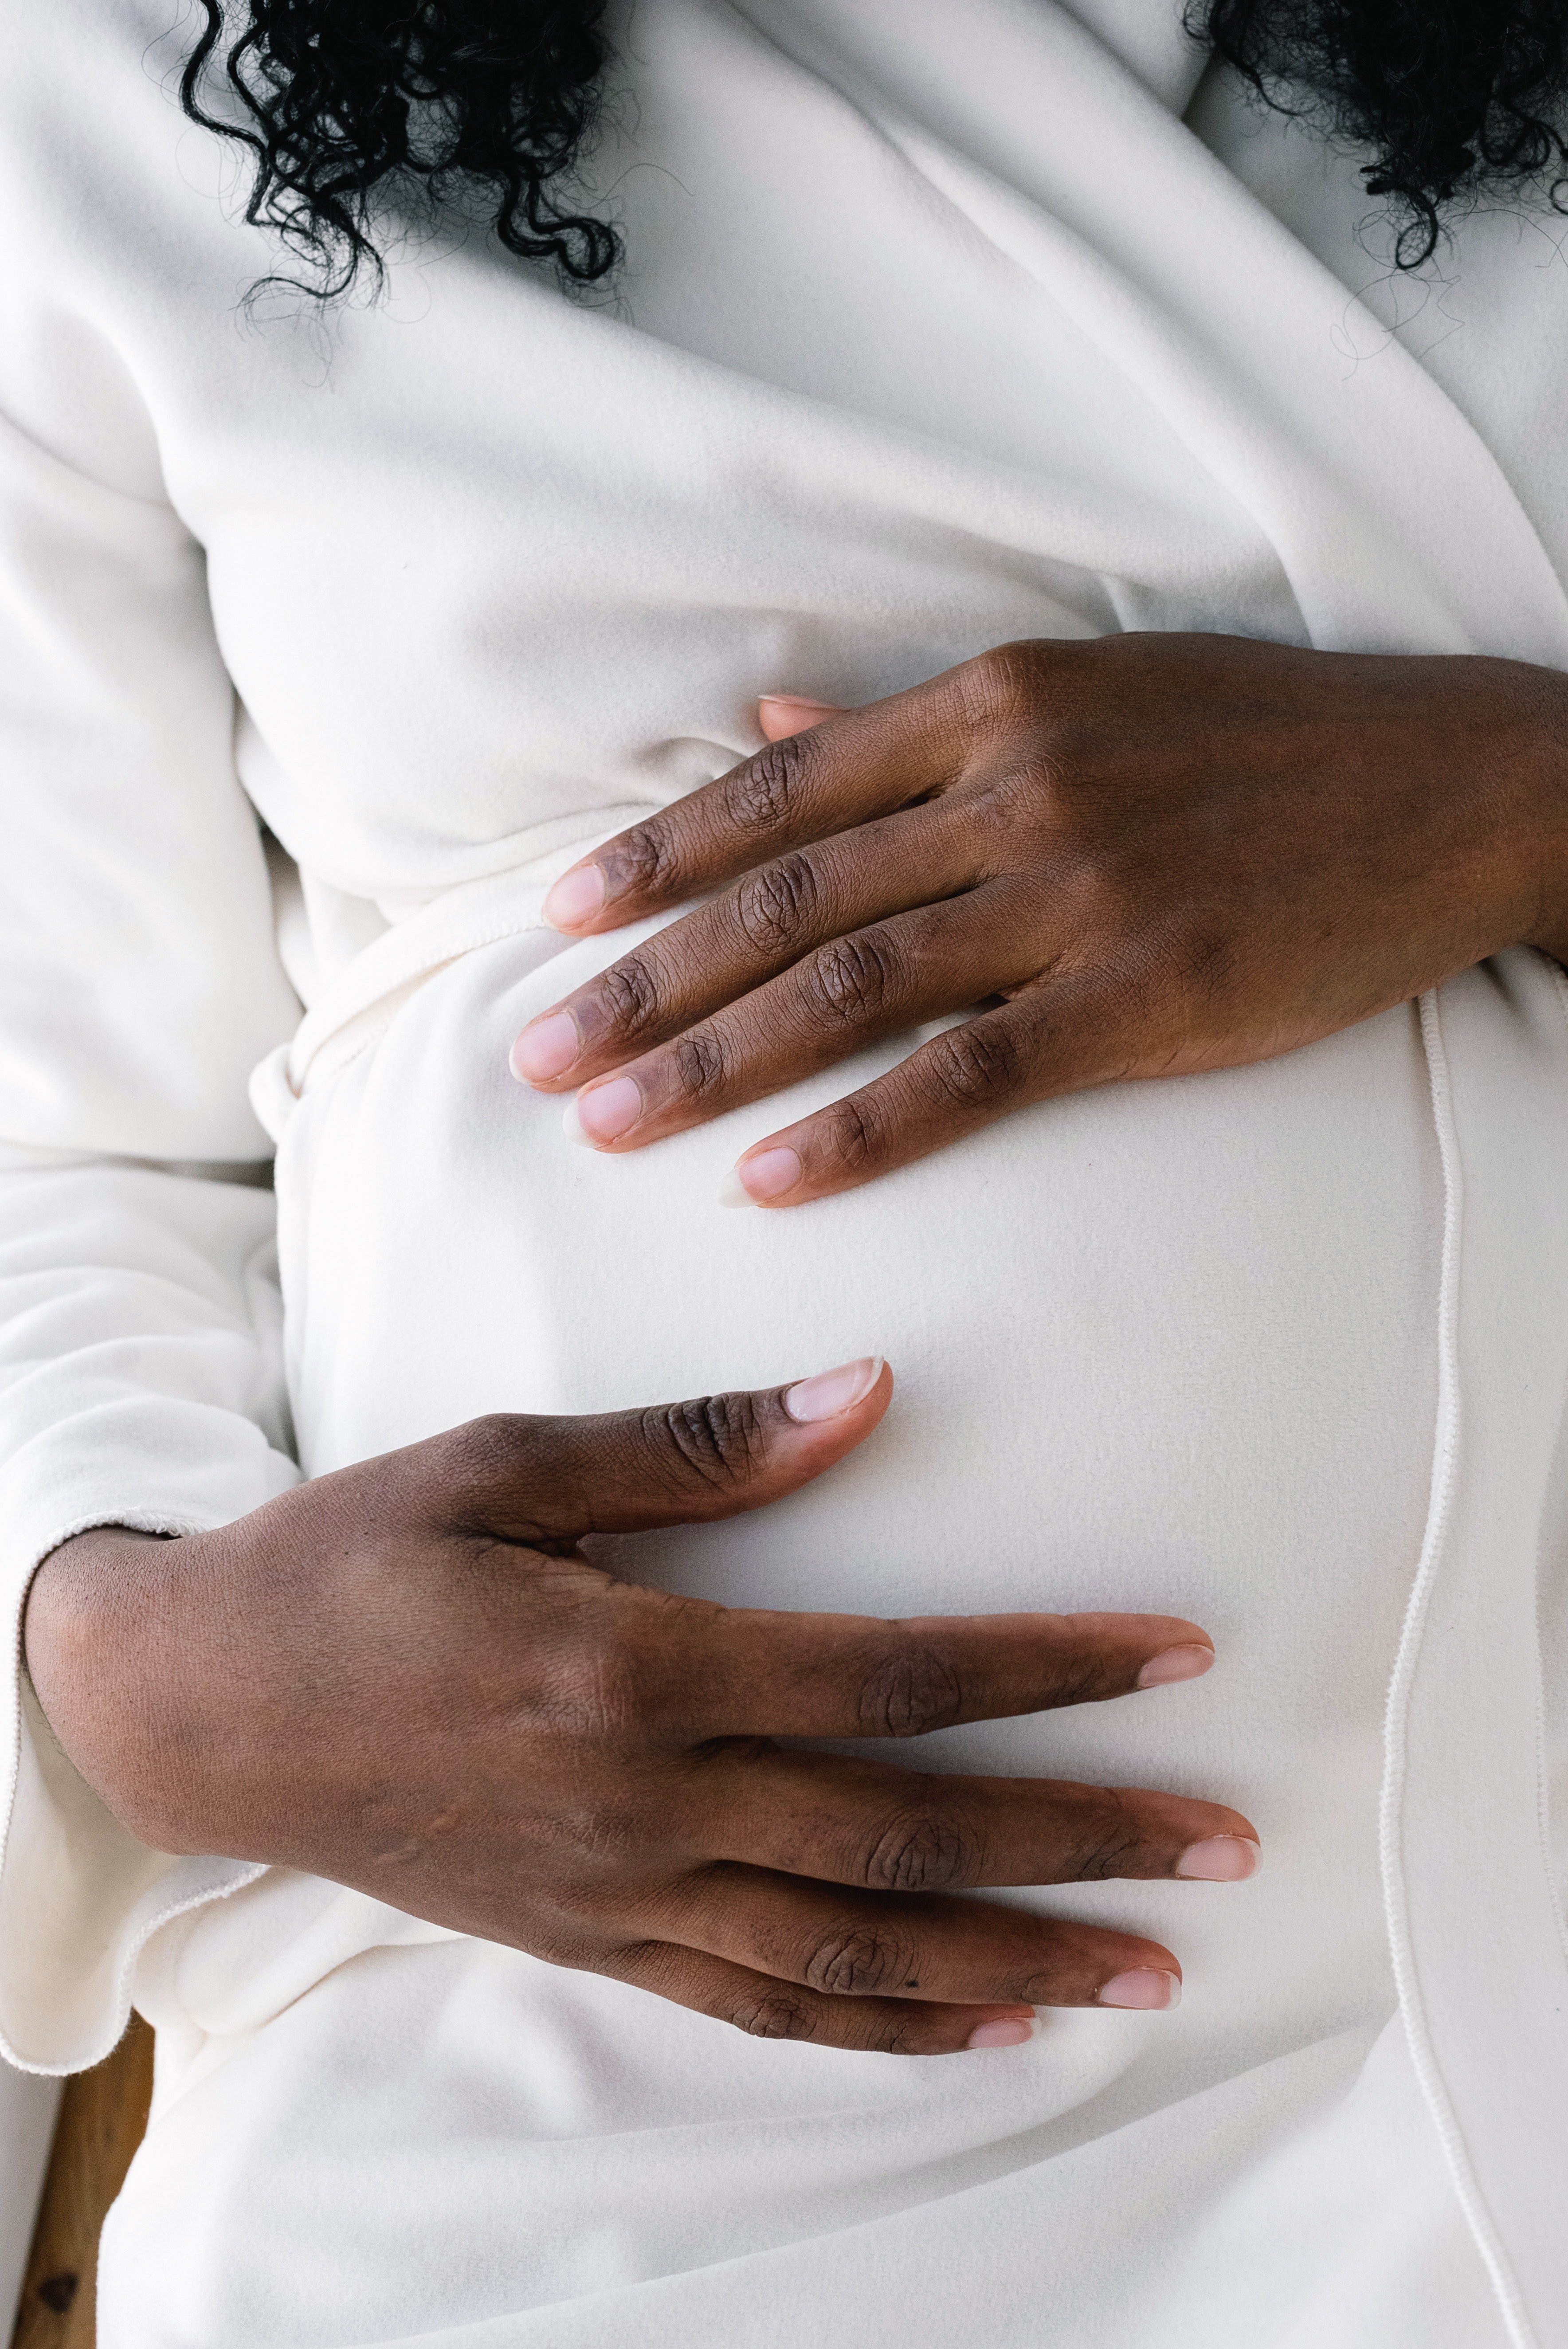  A pregnant woman touching her belly bump. | Photo: Pexels/SHVETS production